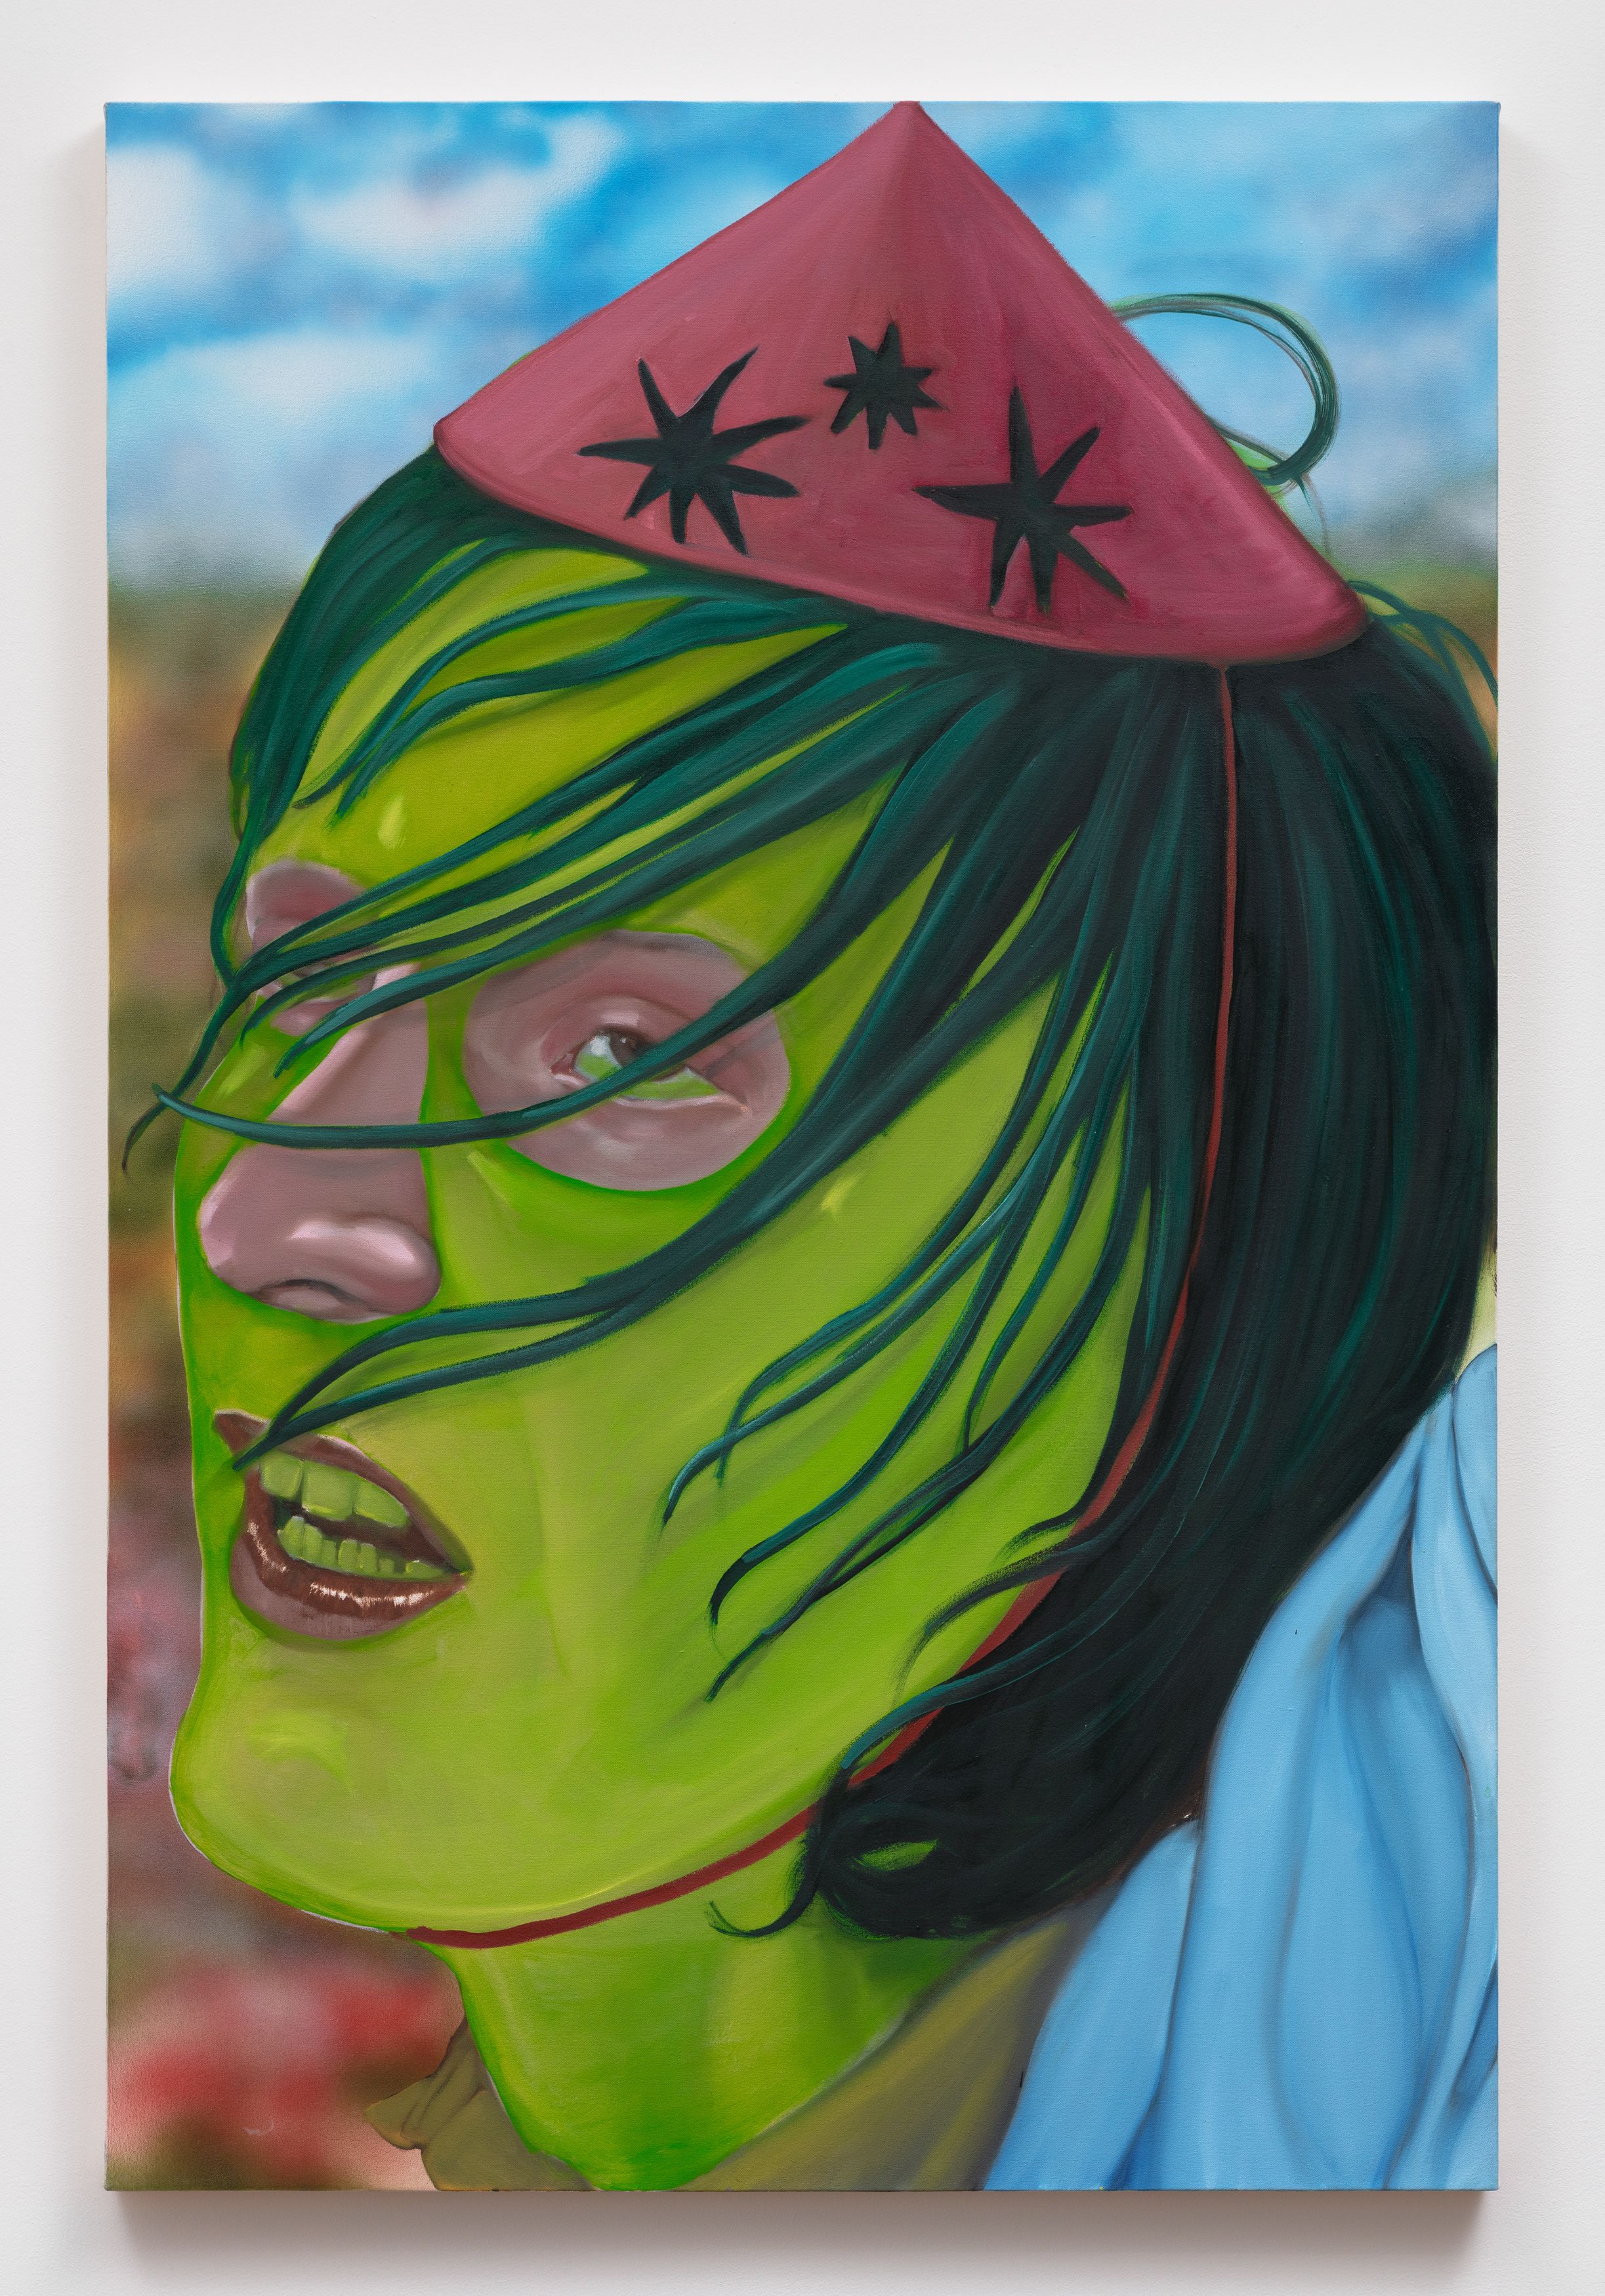 Anja Salonen, The Trance of the Plants (Michael), 2018, oil and acrylic on canvas, 60 x 40 in. (152.4 x 101.6 cm)